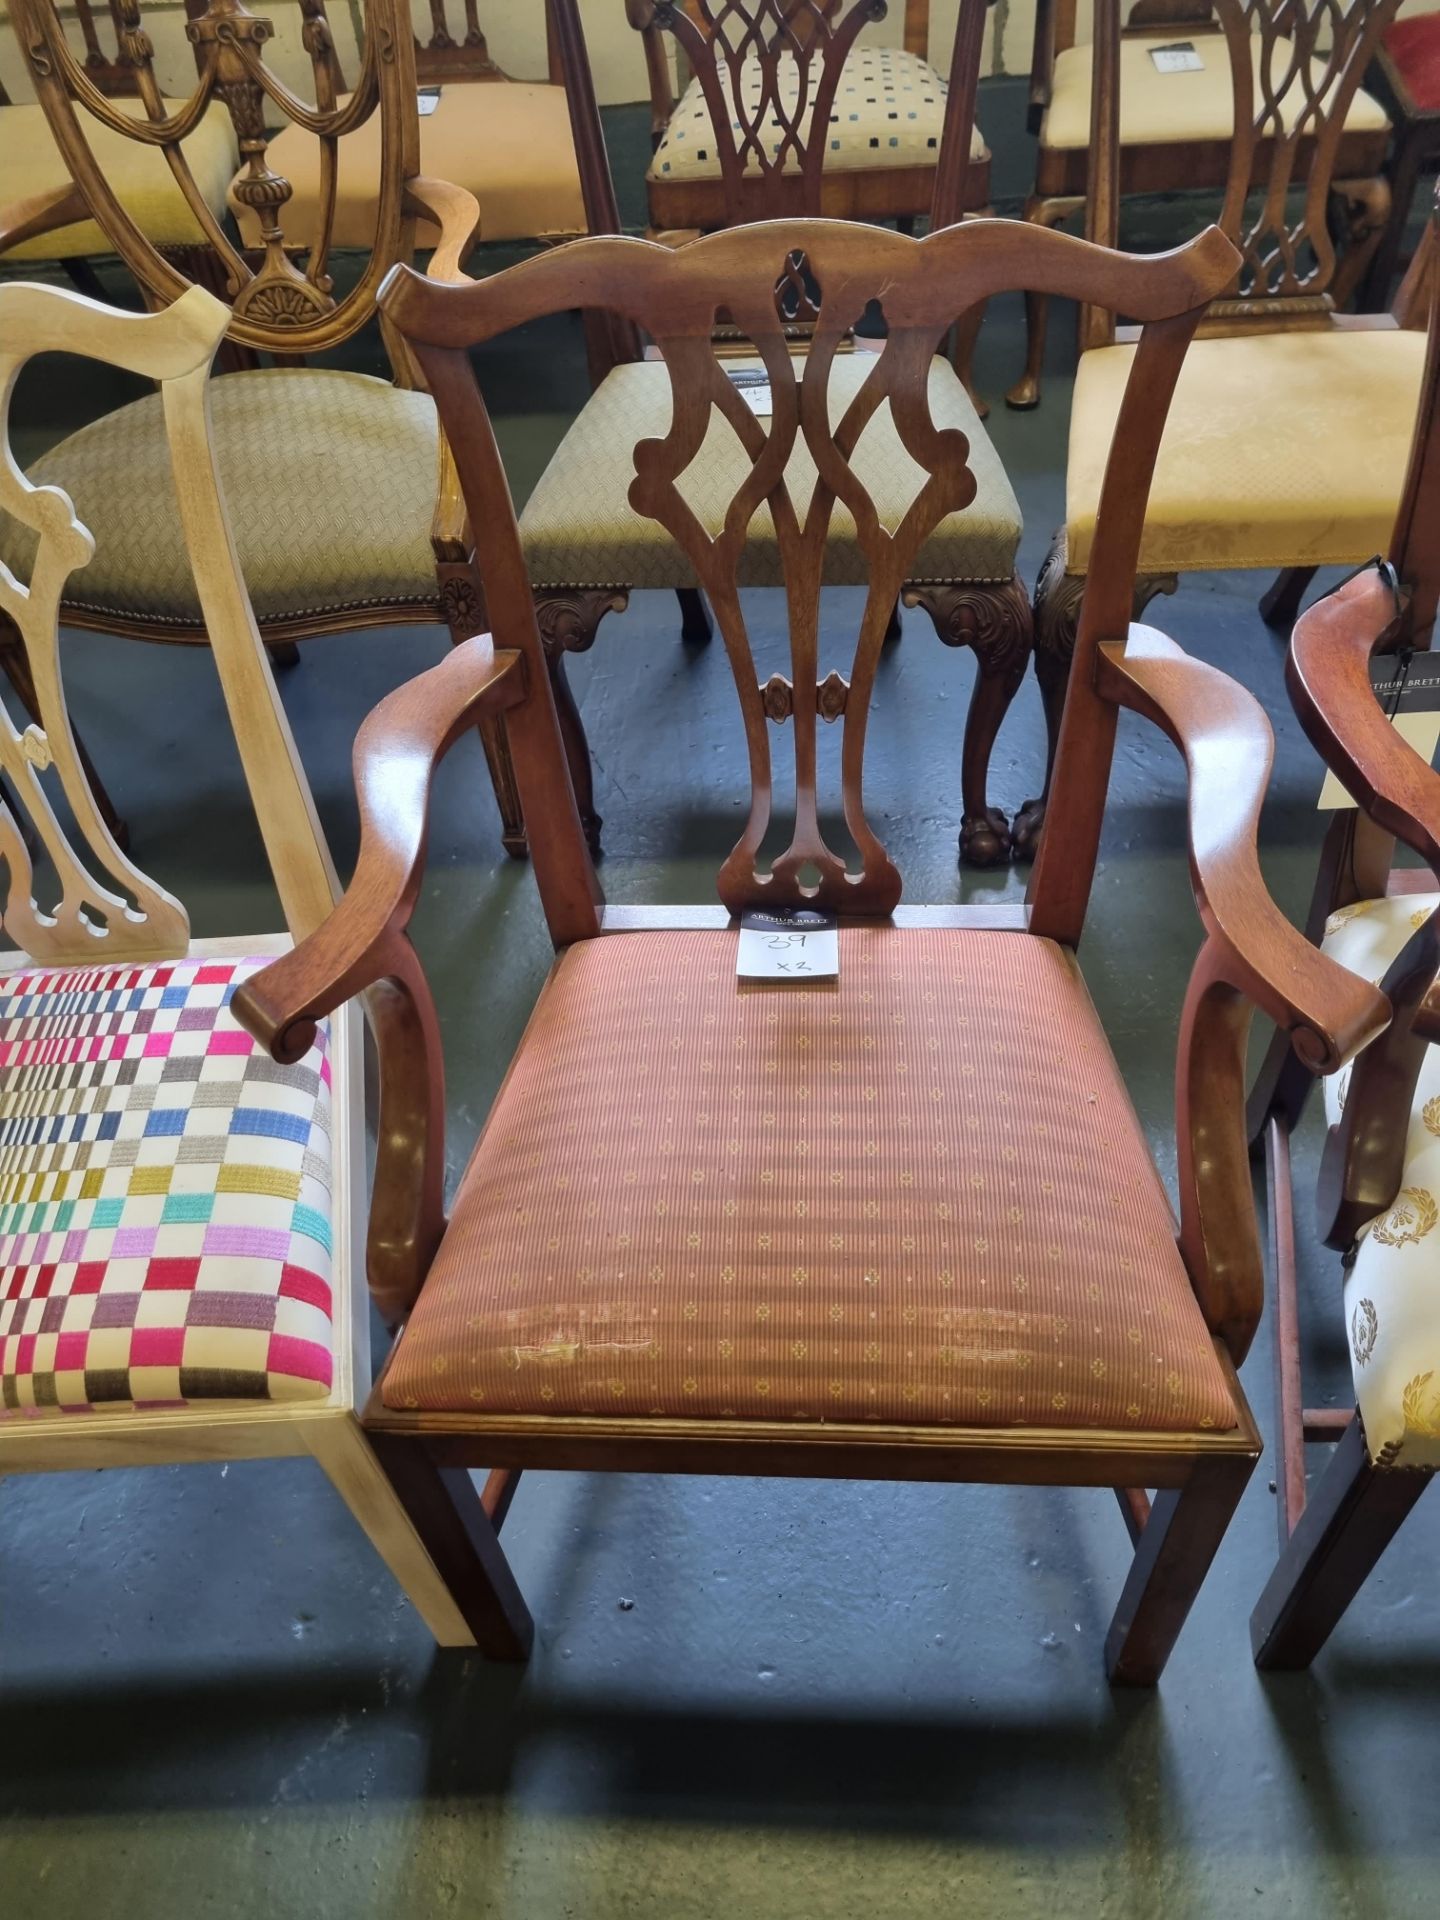 2 X Arthur Brett Classic Mahogany Mid 18th Century Style Upholstered Dining Chairs With Restrained - Image 2 of 3